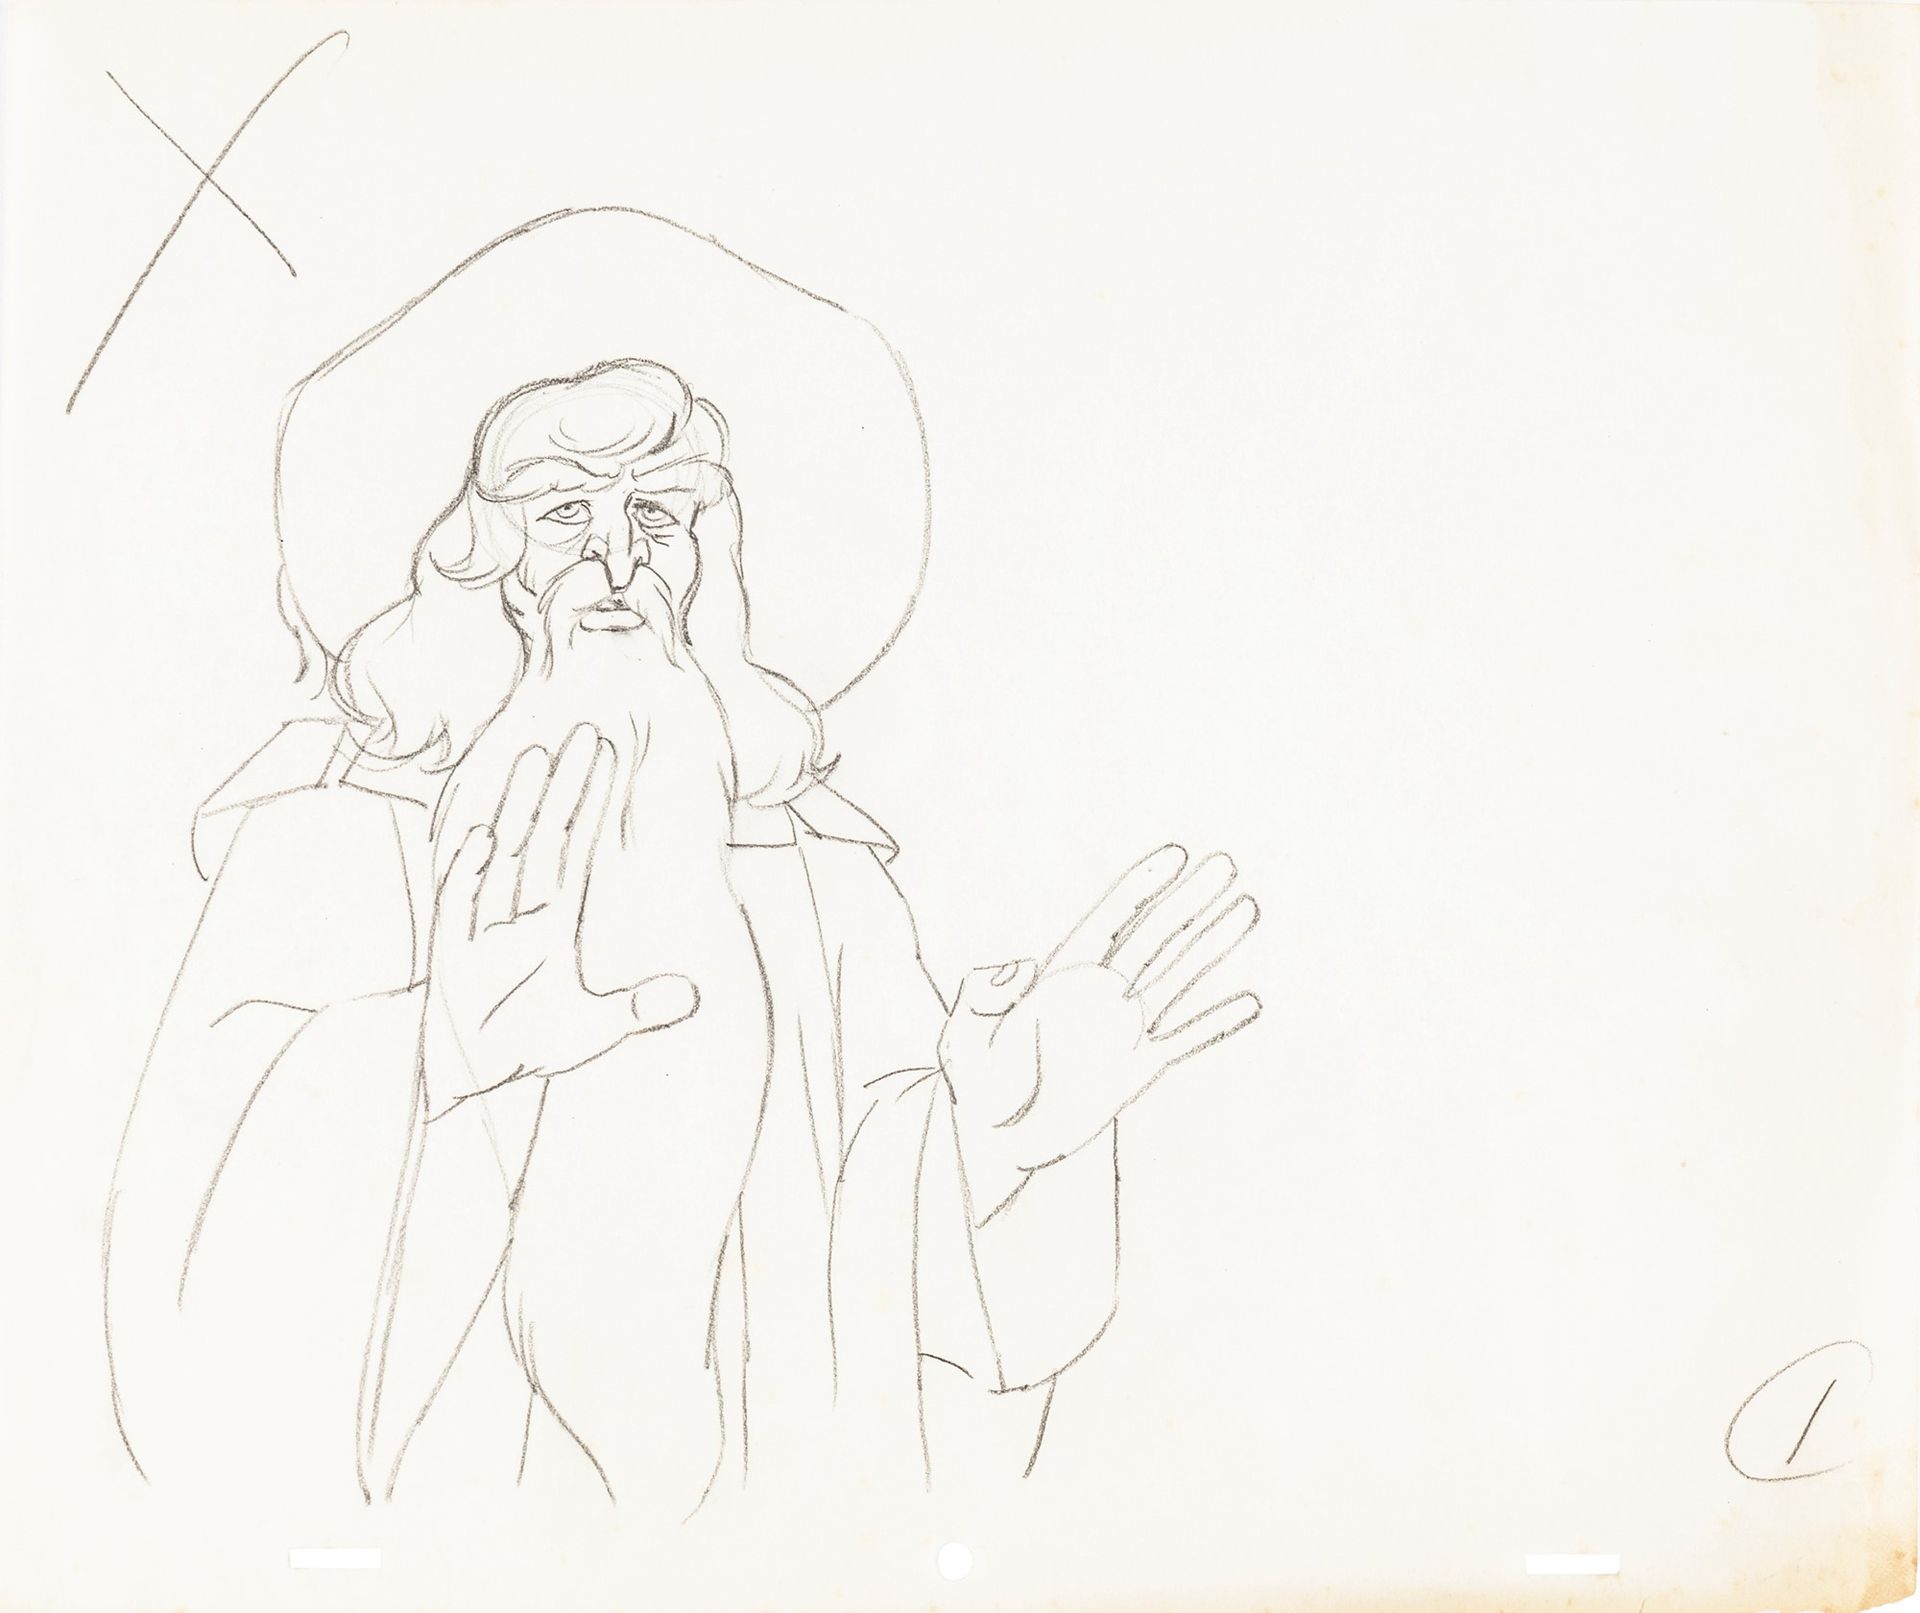 Studio Bakshi The Lord of the Rings, 1978

pencil on paper
31,5 x 27 cm
Producti&hellip;